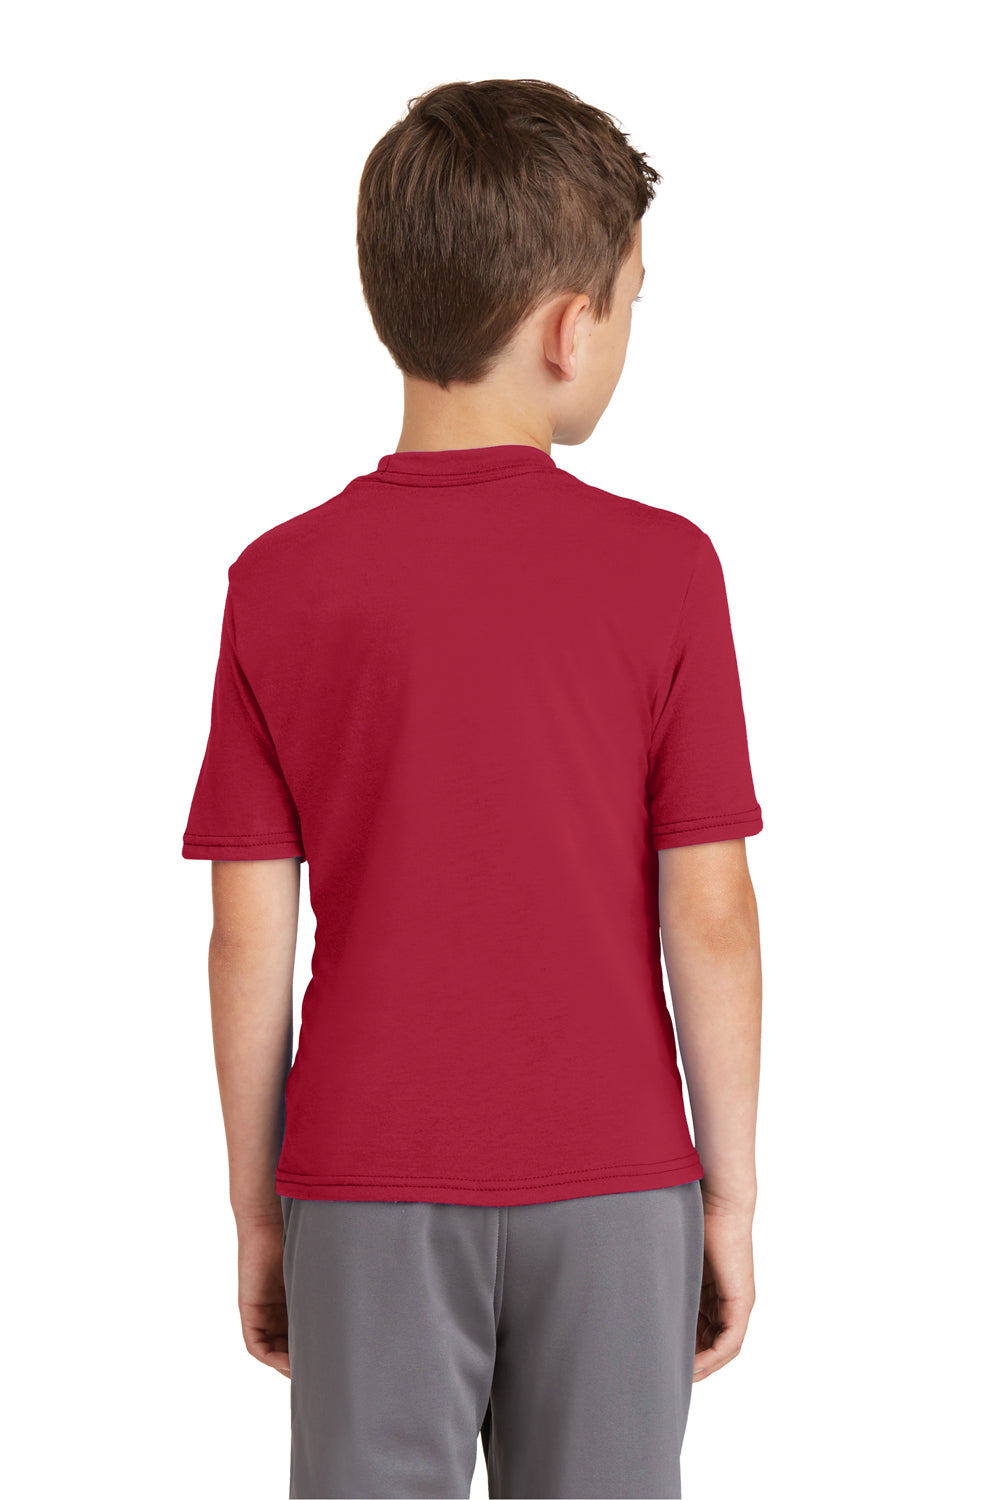 Port & Company PC381Y Youth Dry Zone Performance Moisture Wicking Short Sleeve Crewneck T-Shirt Red Back